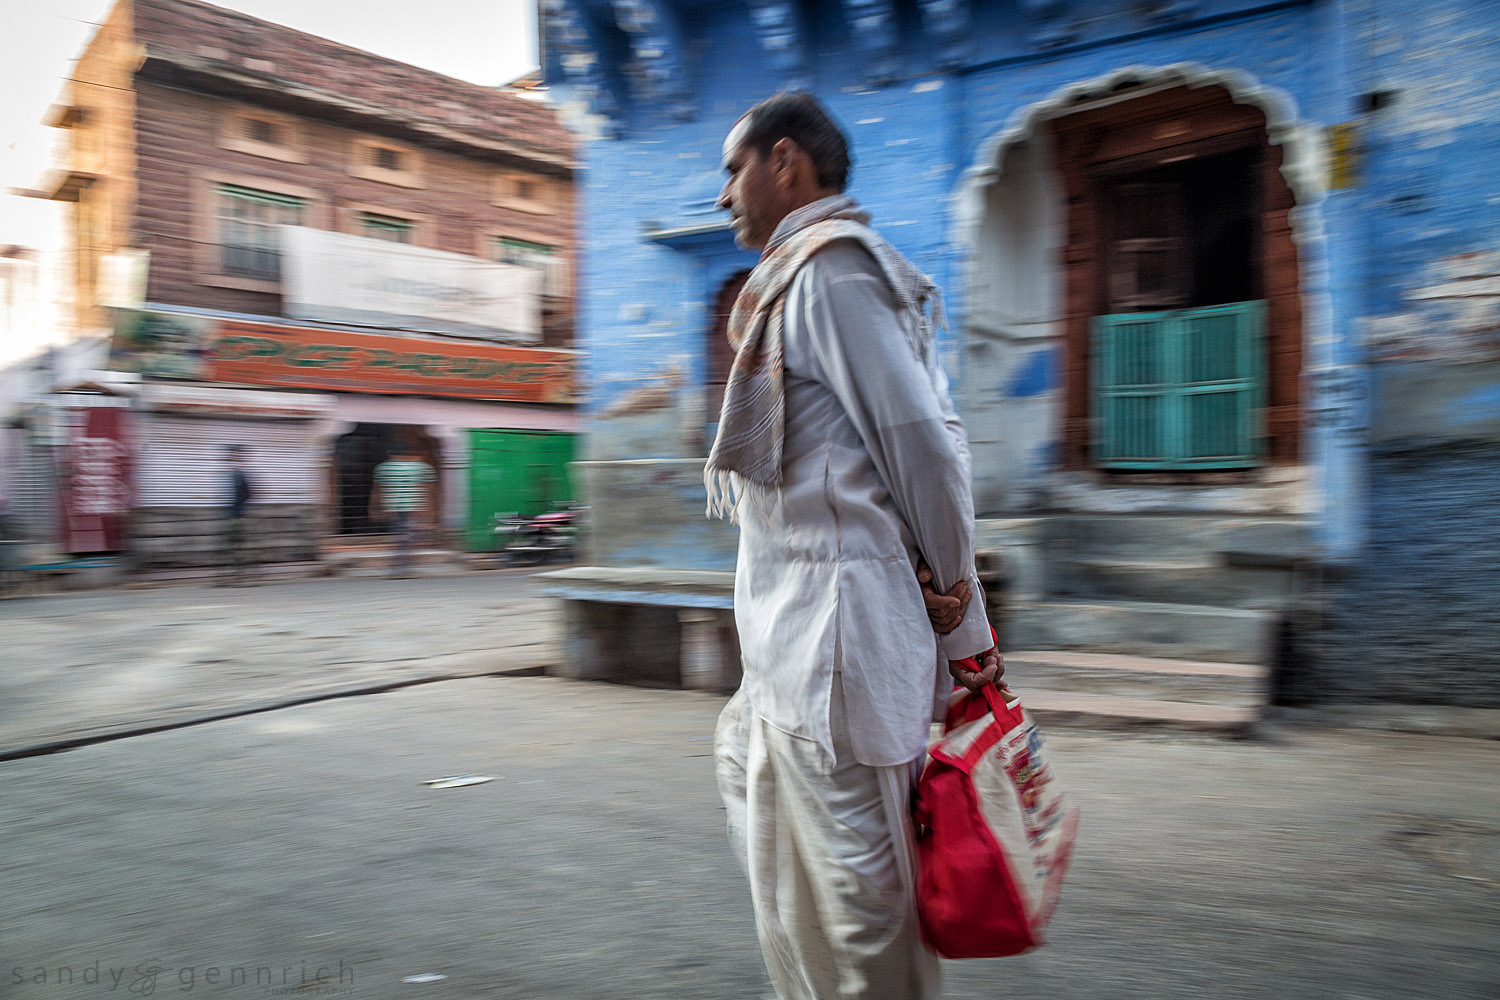 Man With Red Bag-India in Motion-Jodhpur-India